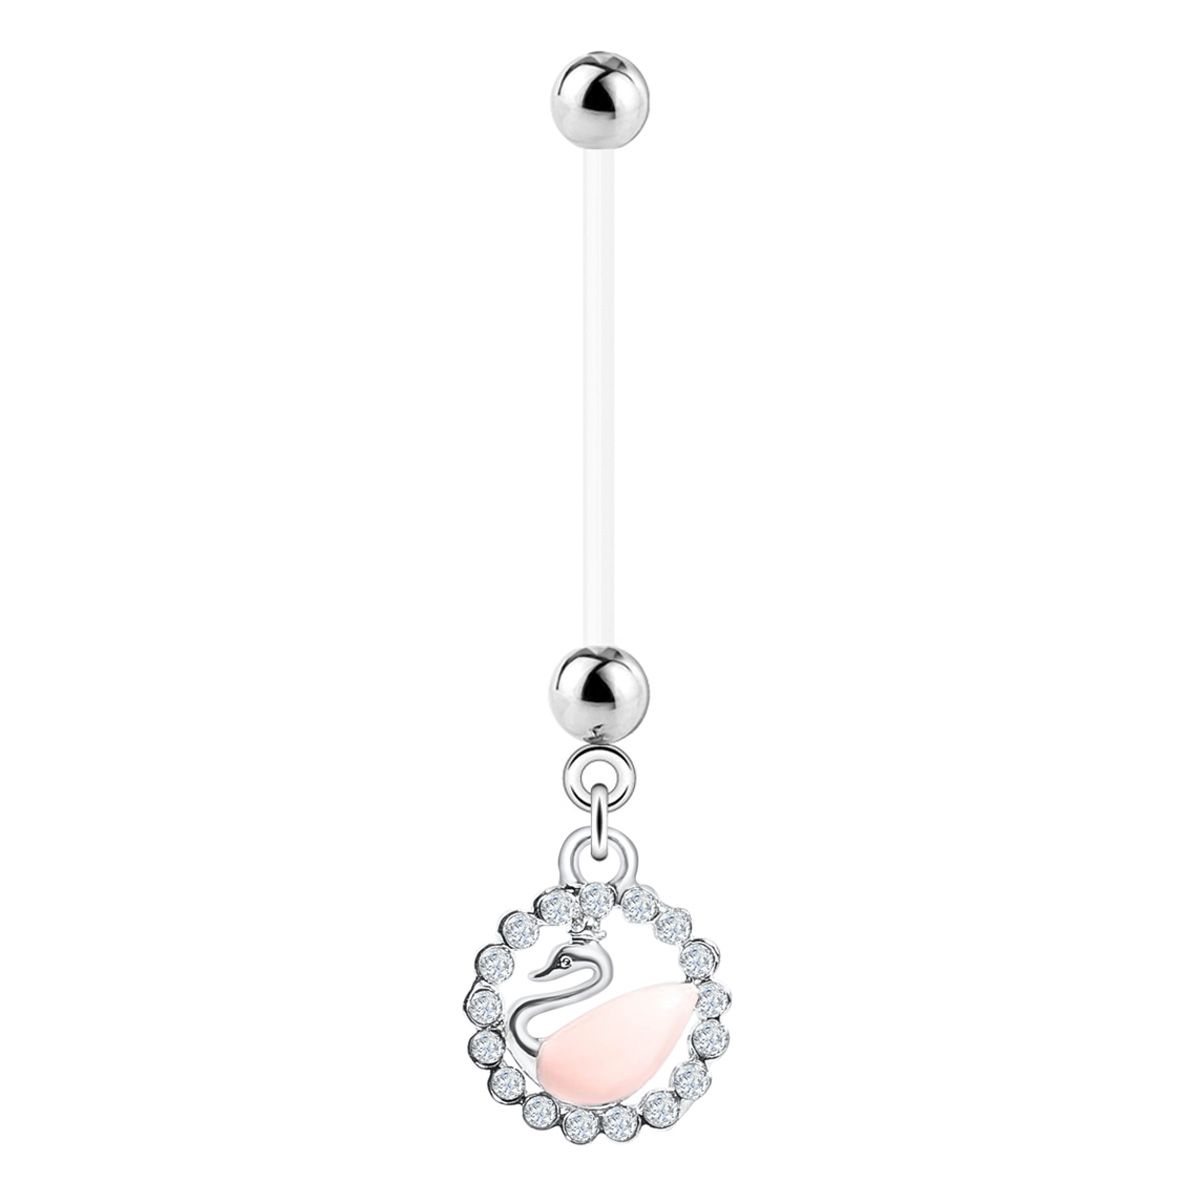 Pregnancy belly button ring with pink swan dangle